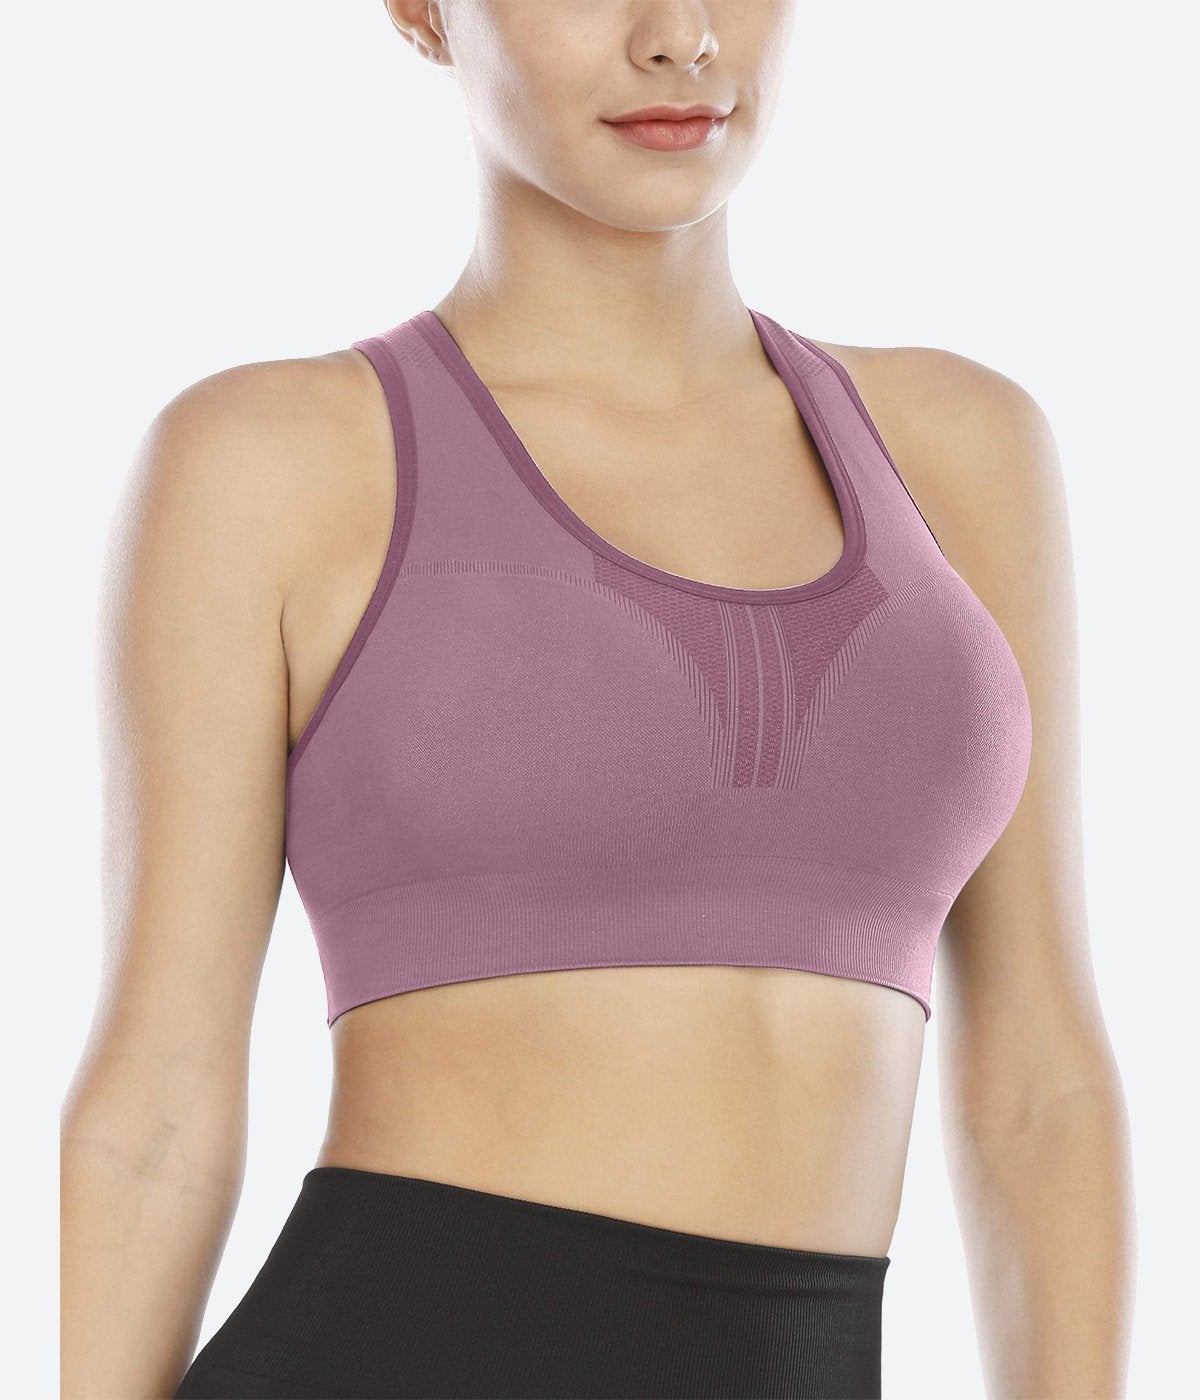 Racerback Sports Bras, High-Impact, Padded & More